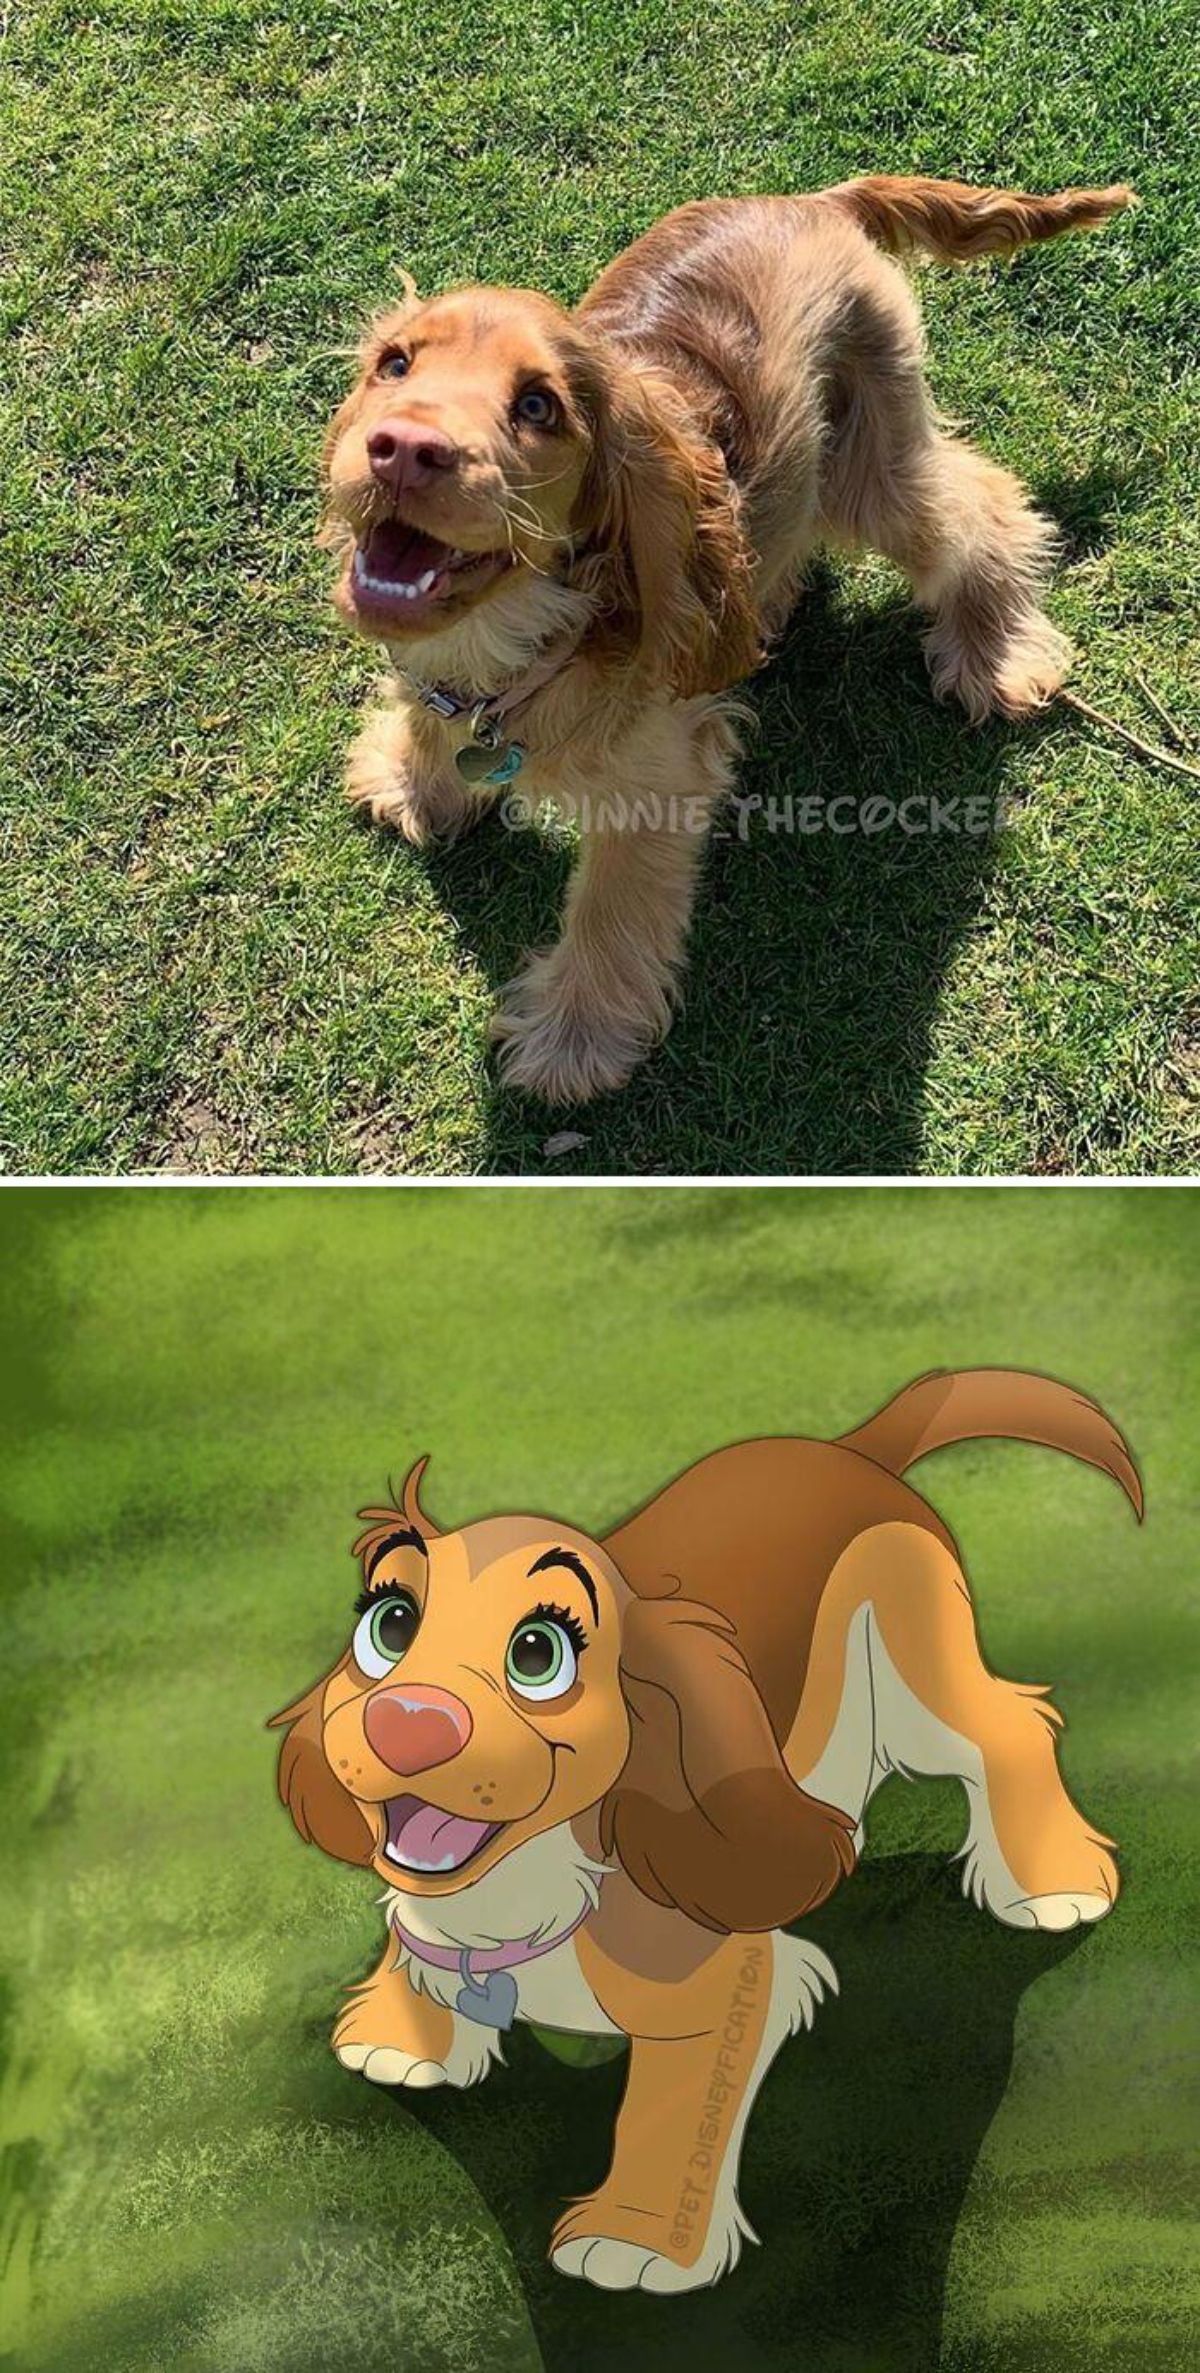 real photo and cartoon image of a brown cocker spaniel on grass